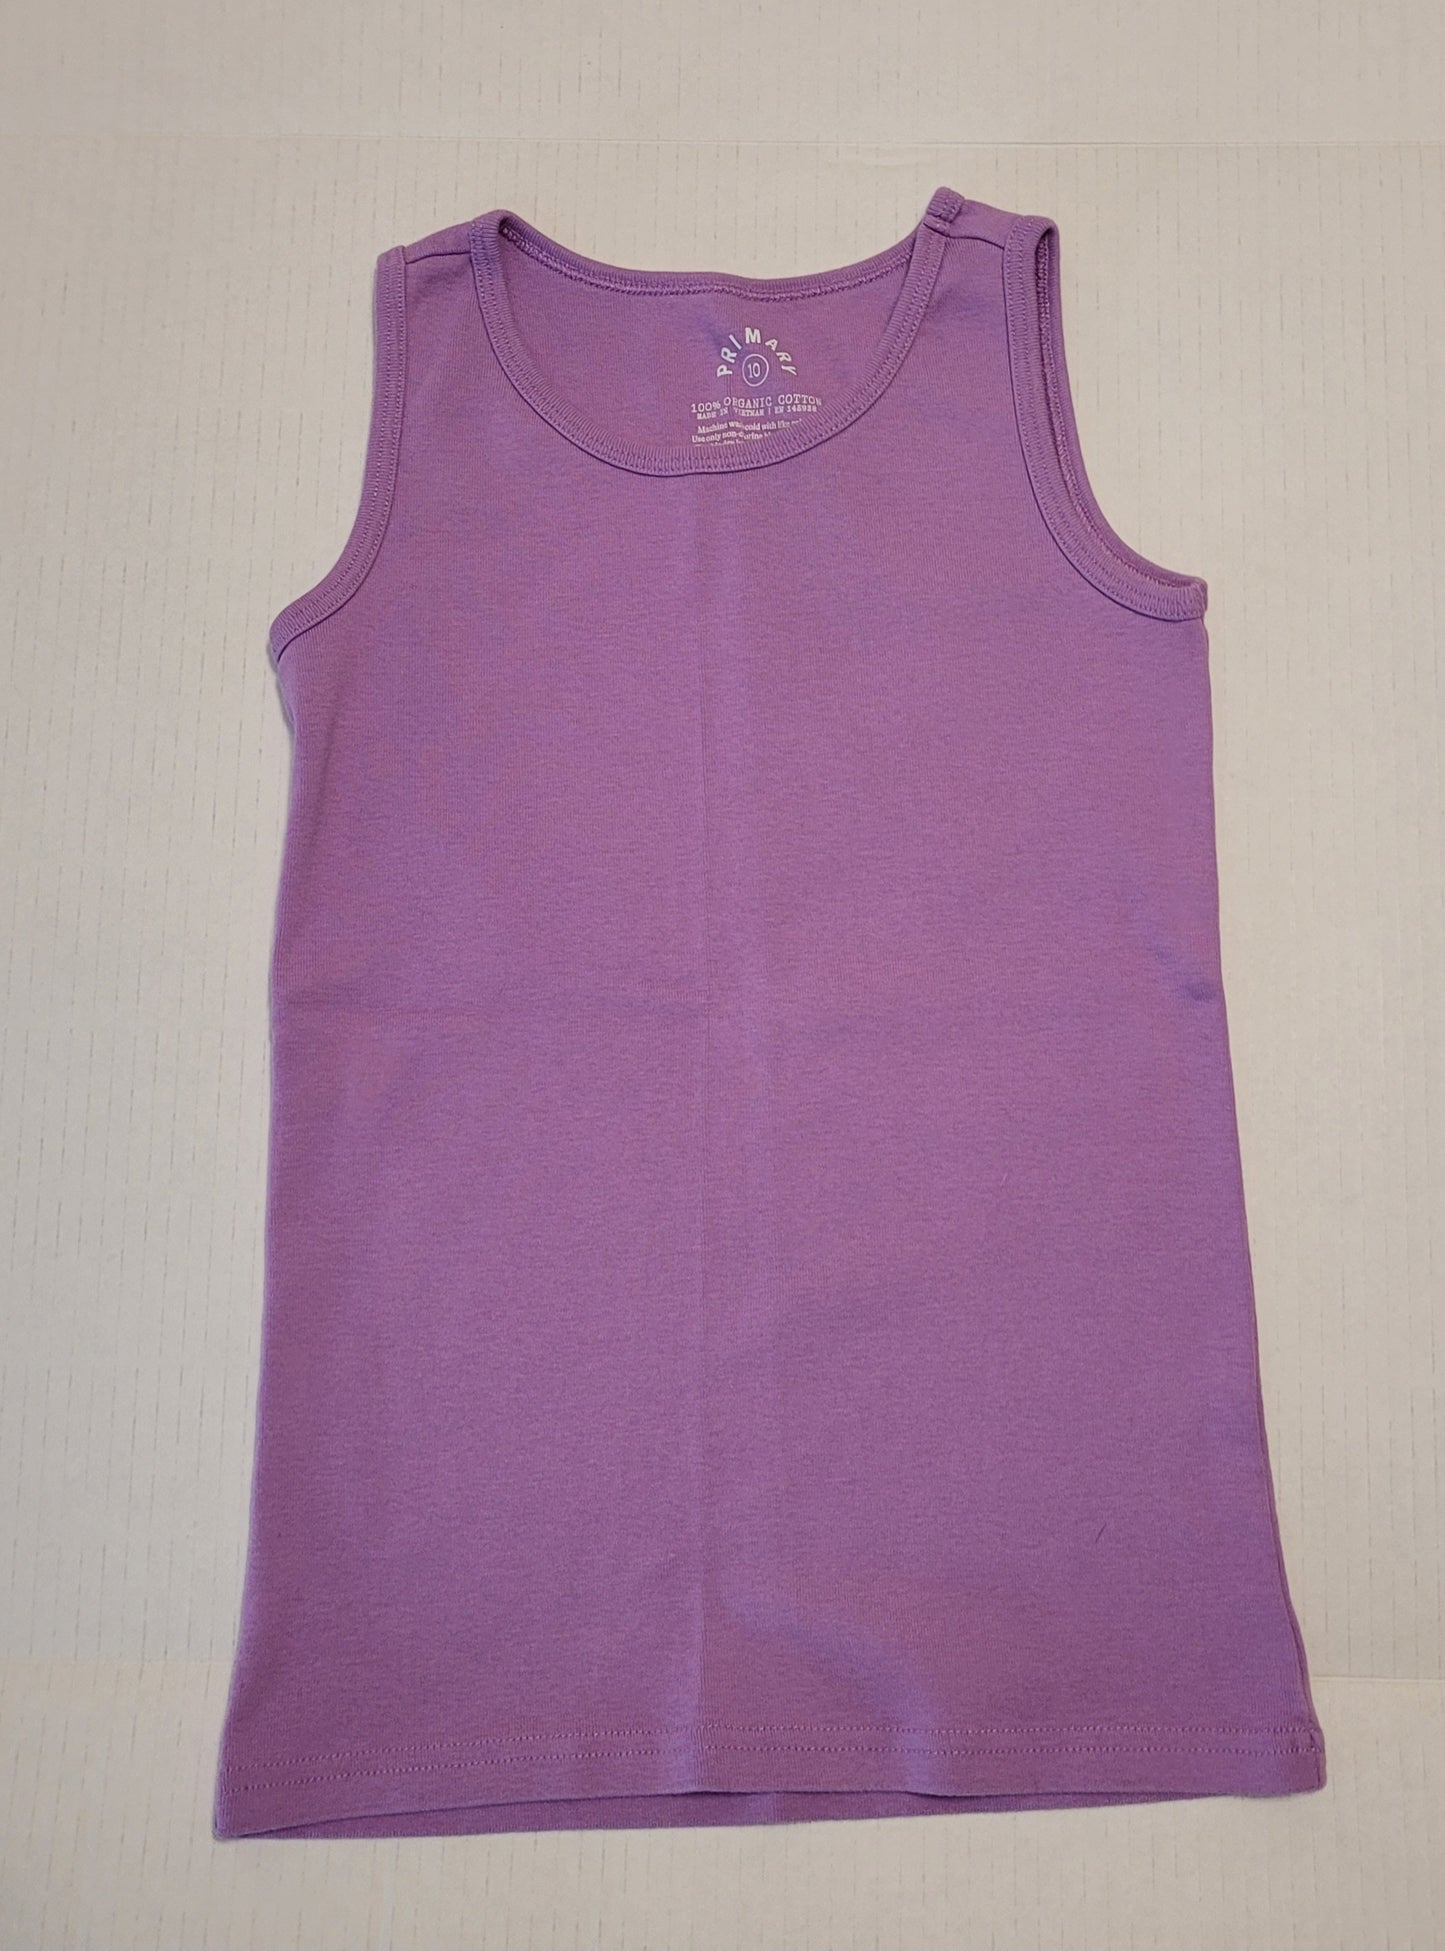 Primary Girls Lilac Tank Top Size 10